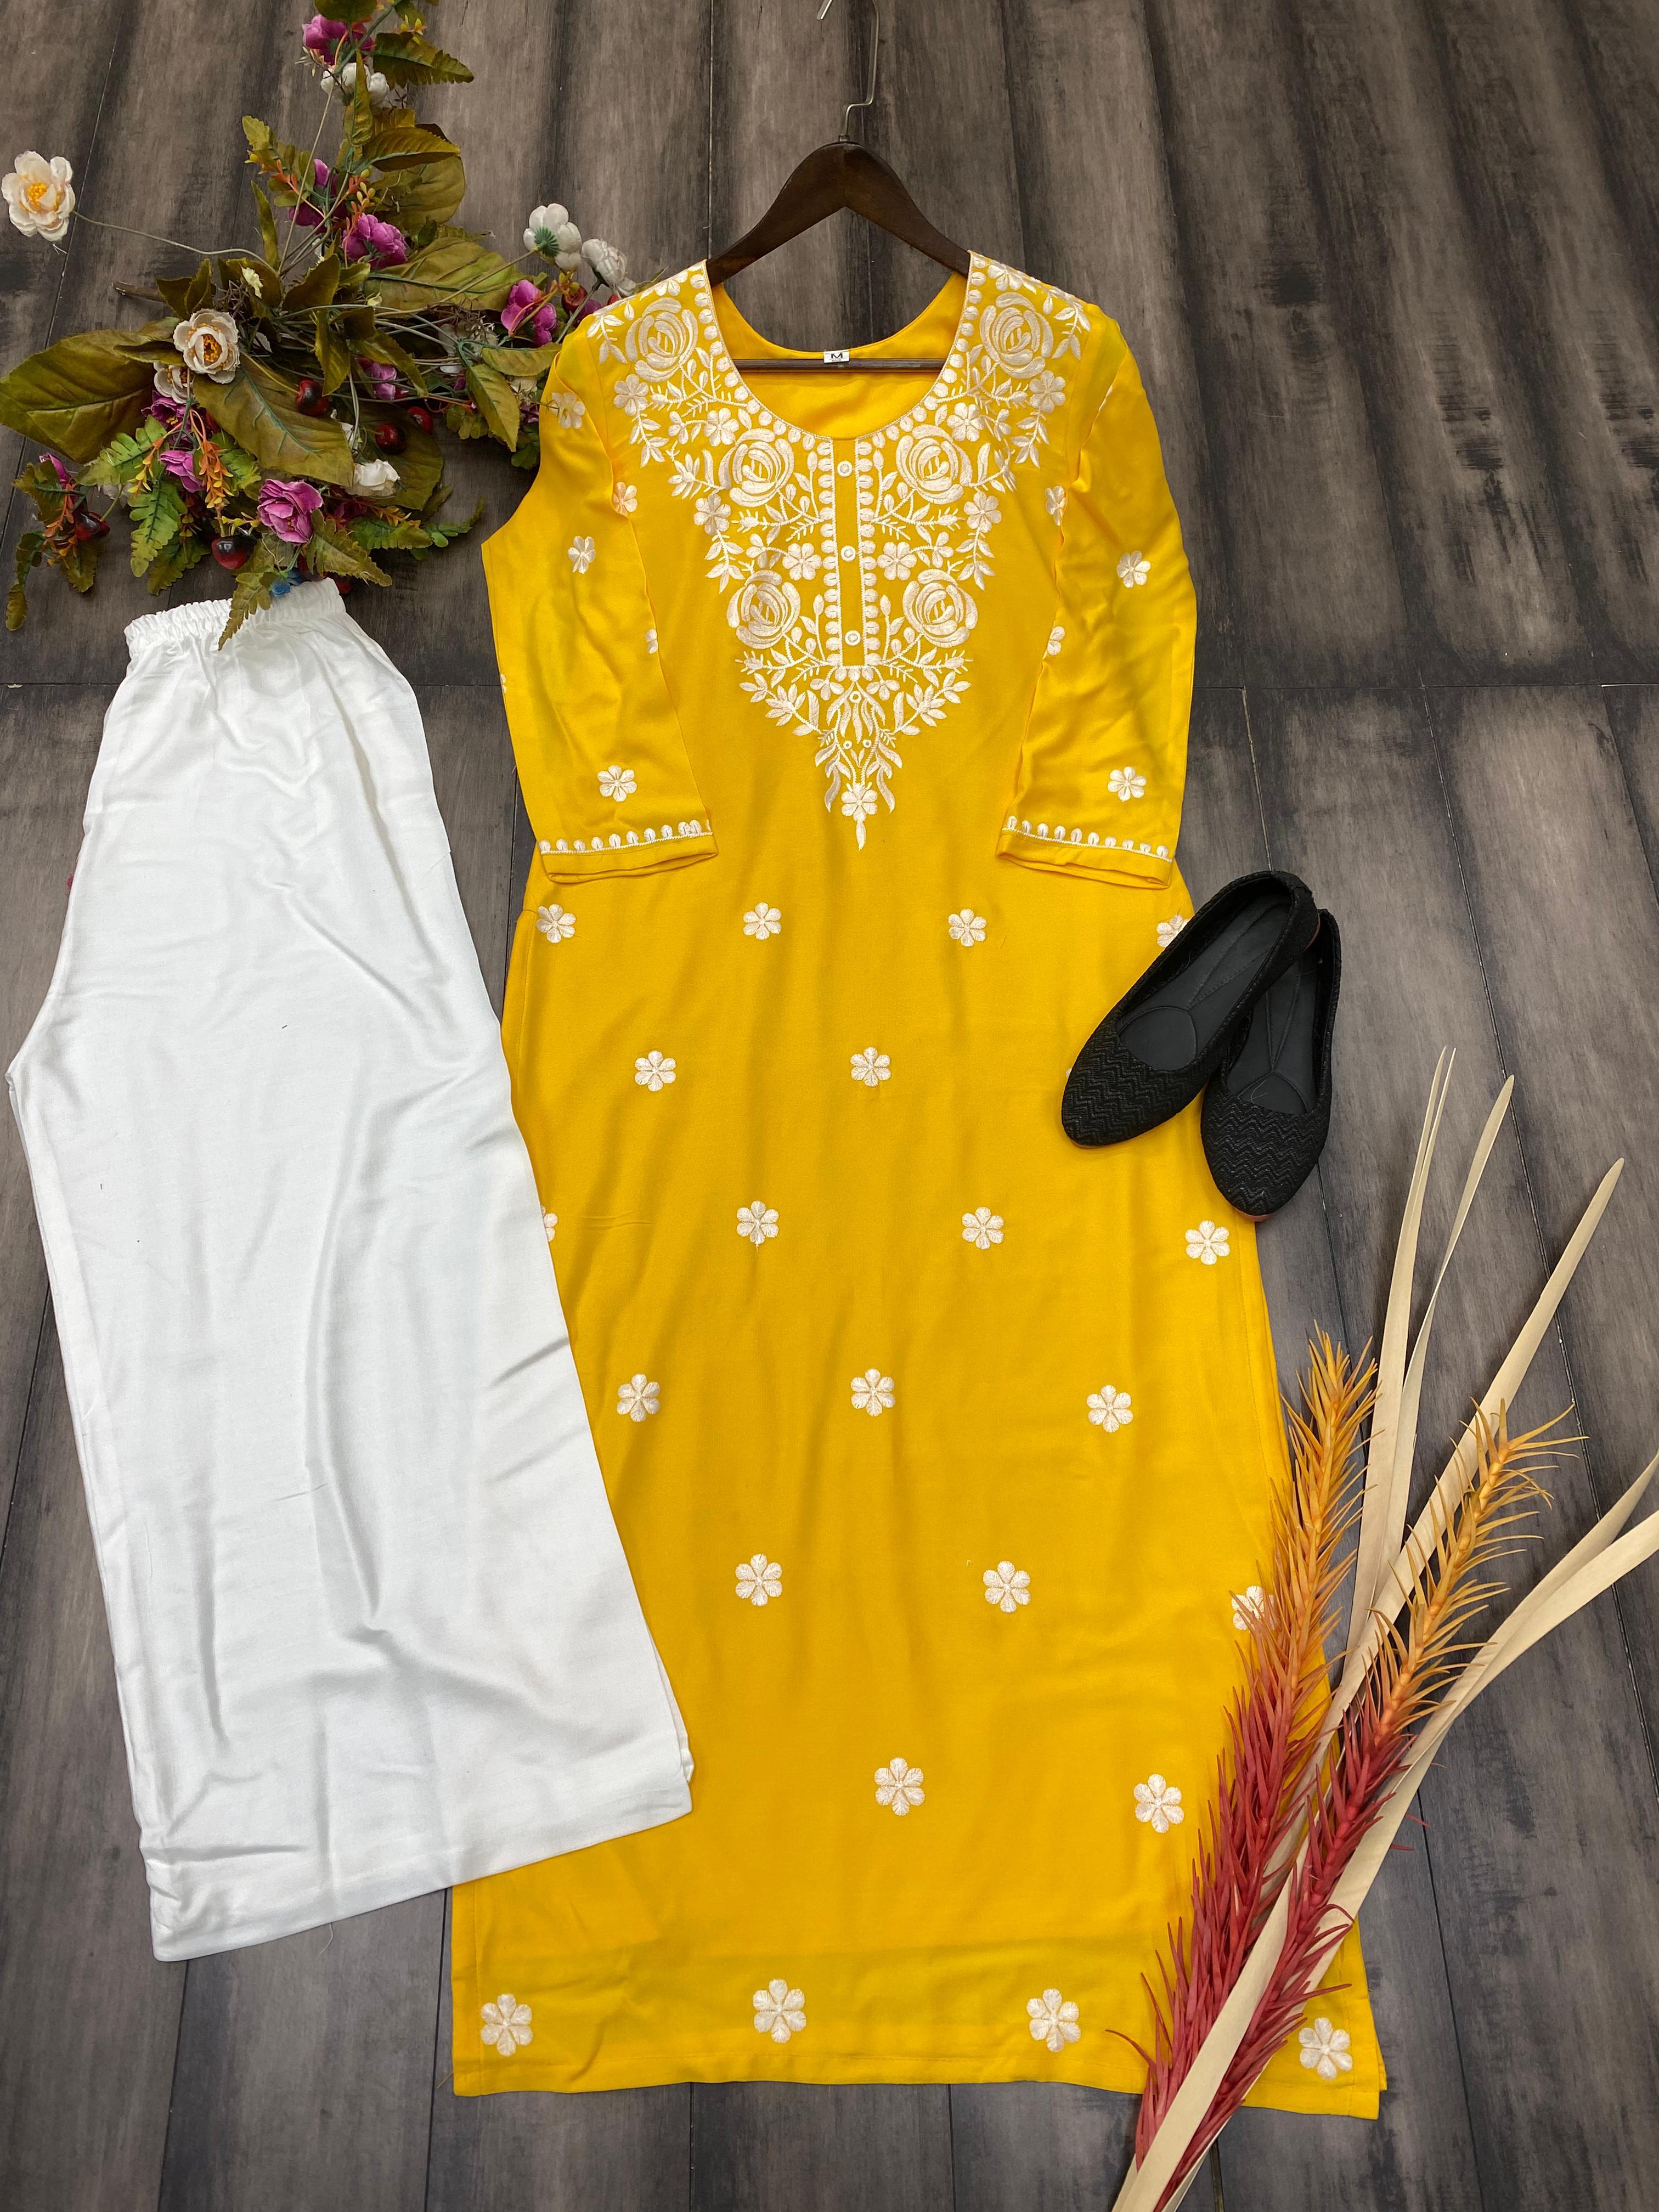 BE 250 DESIGNER SUMMER SPECIAL RAYON SUITS